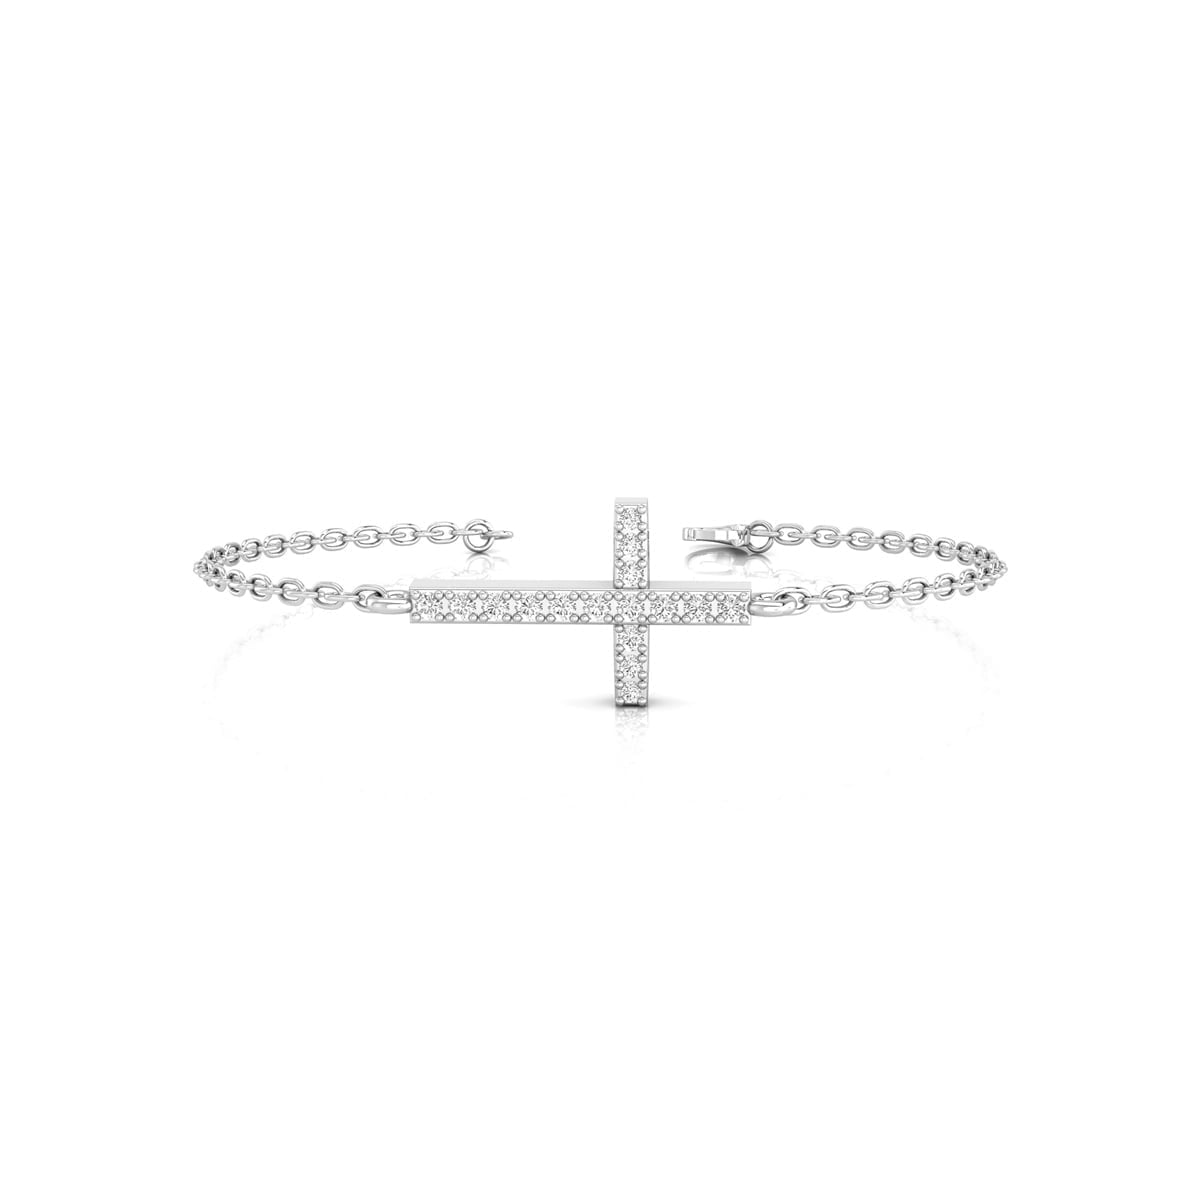 Women's Casual Look Round Cut Moissanite Sideways Cross Bracelet For Any Occasion